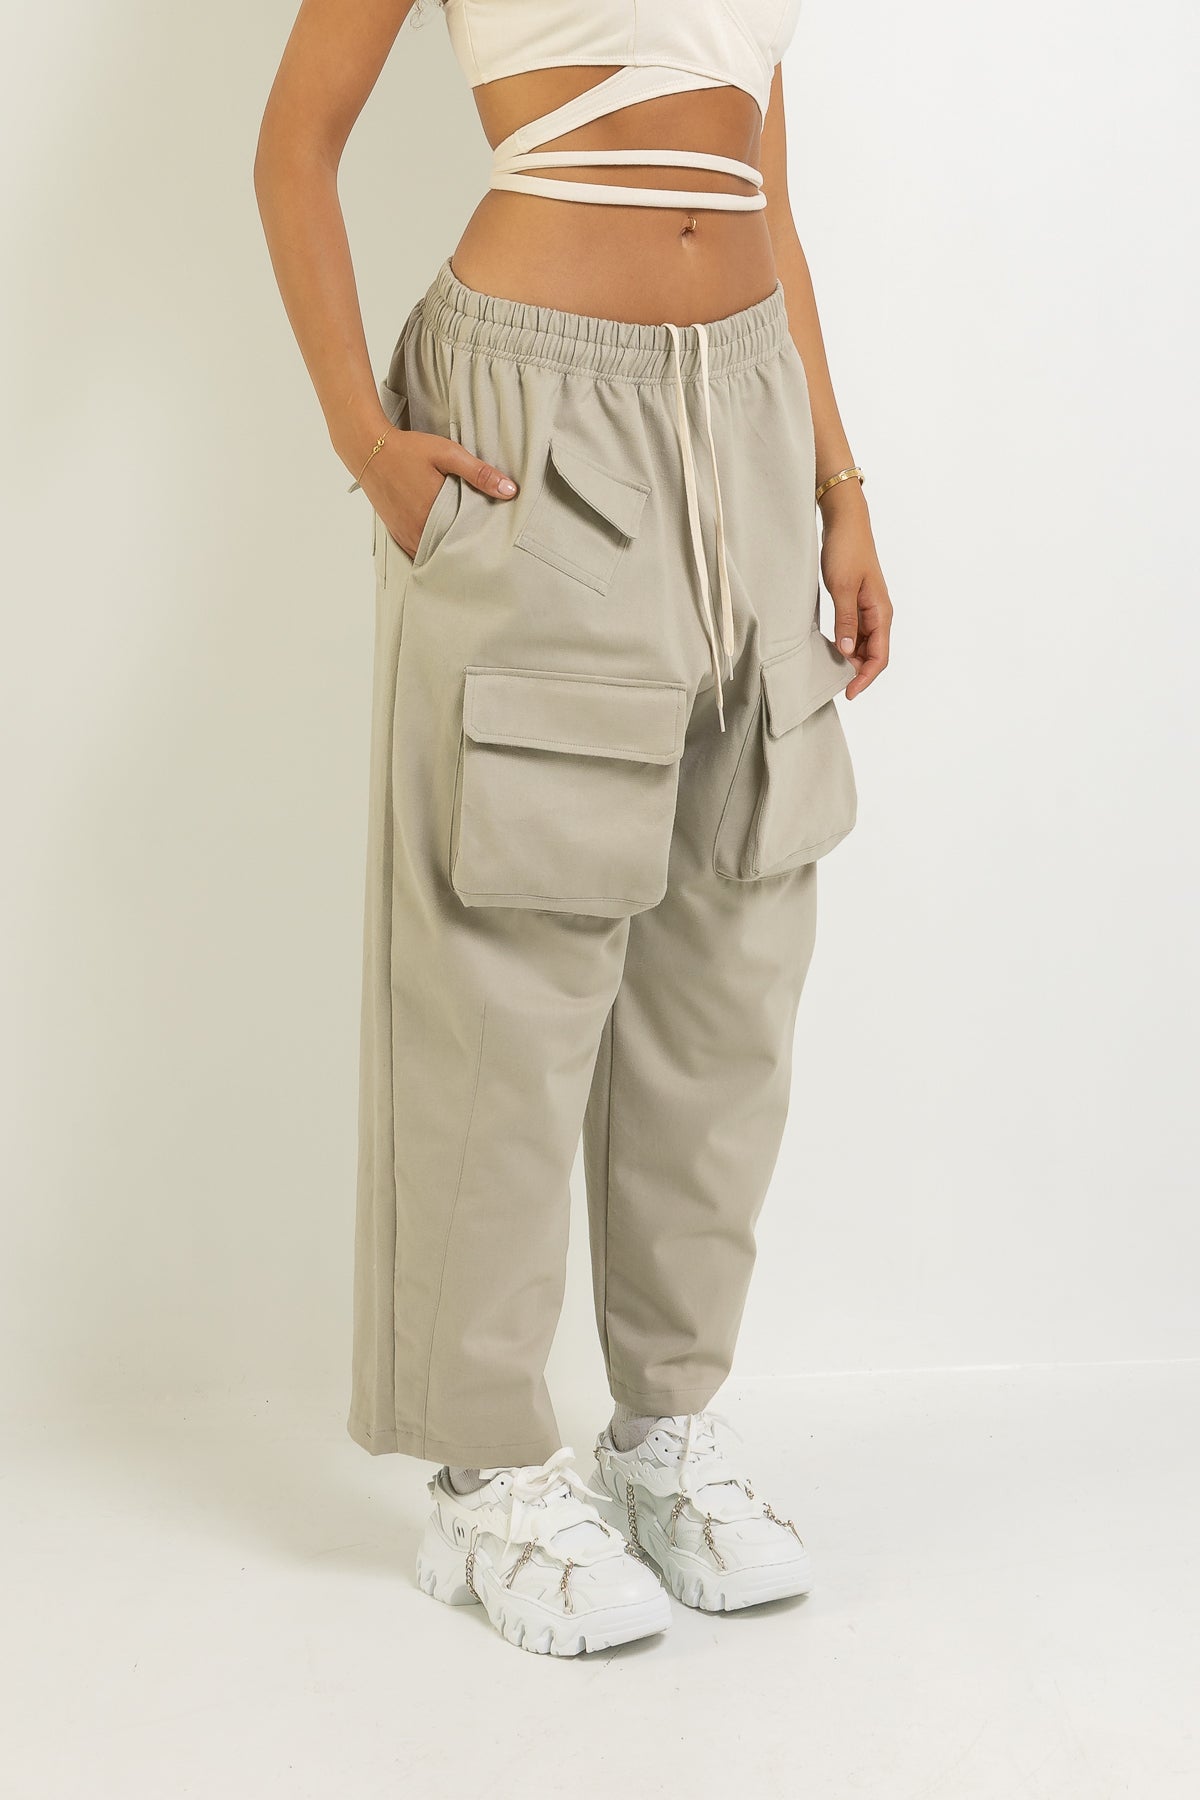 DIONYSUS CROPPED CARGO PANT - MERCY HOUSE